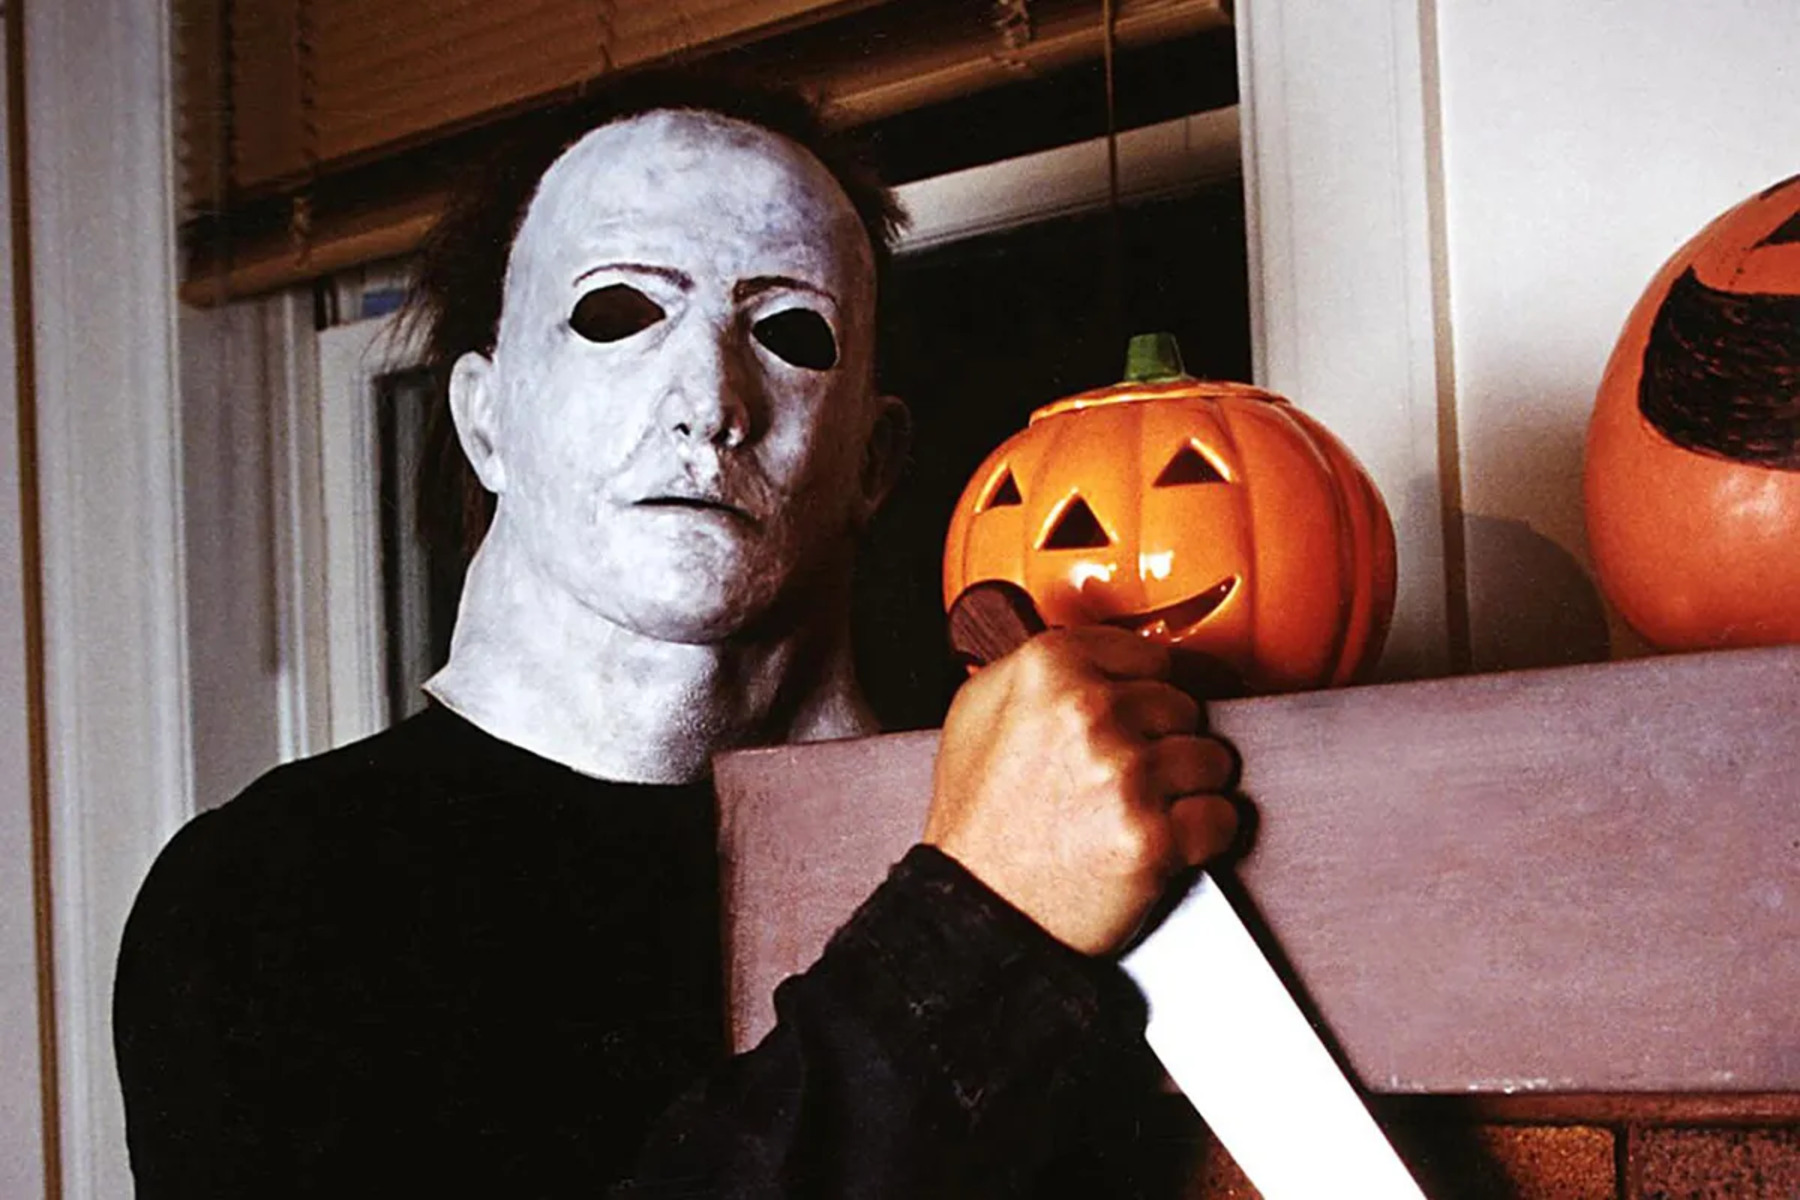 How To Watch The Halloween Movies